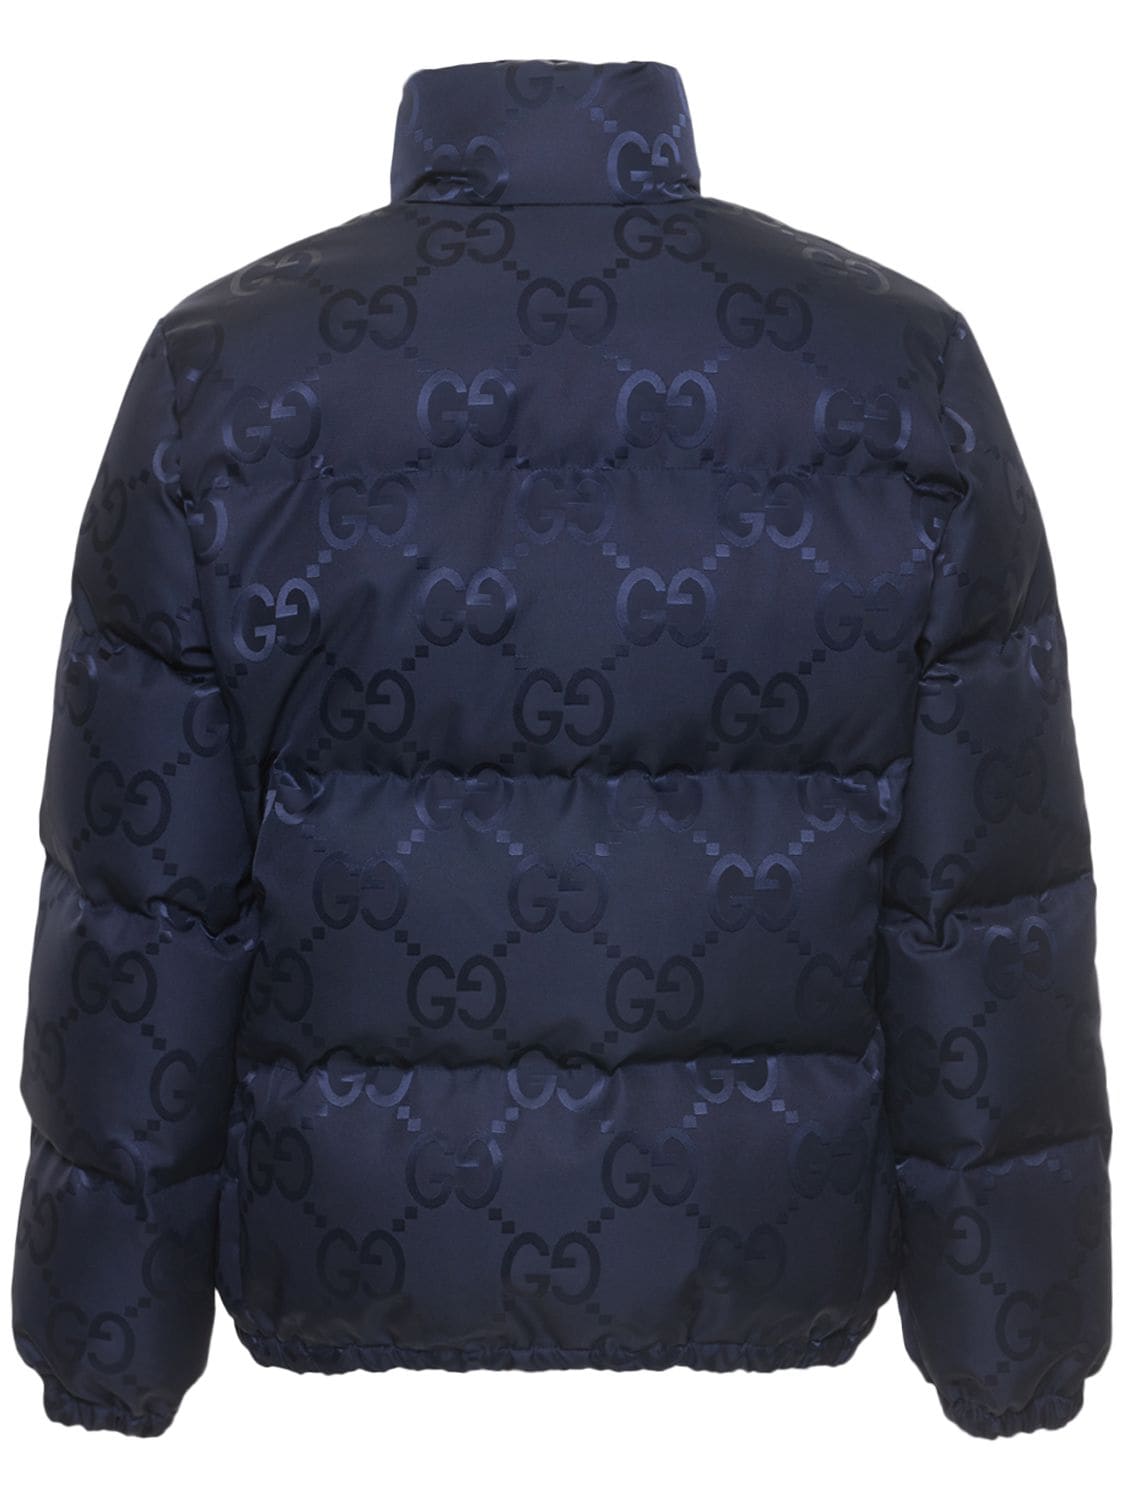 GG Reversible Canvas Jacket in Blue - Gucci